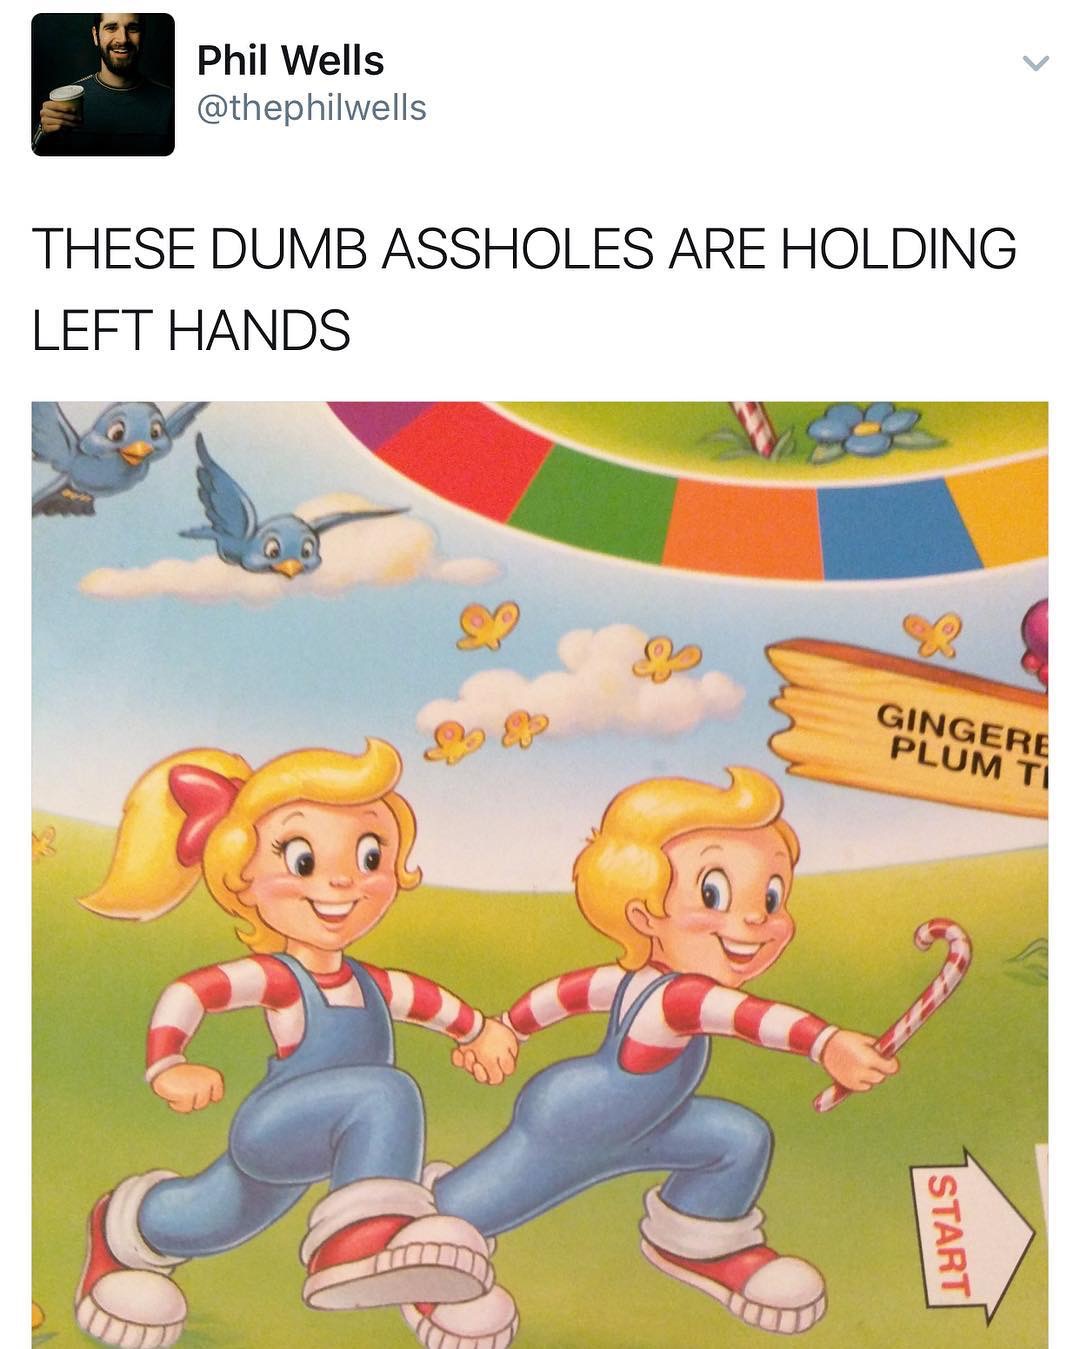 candyland left hand meme - Phil Wells Phil Wells These Dumb Assholes Are Holding Left Hands Gingere Plum Ti Start